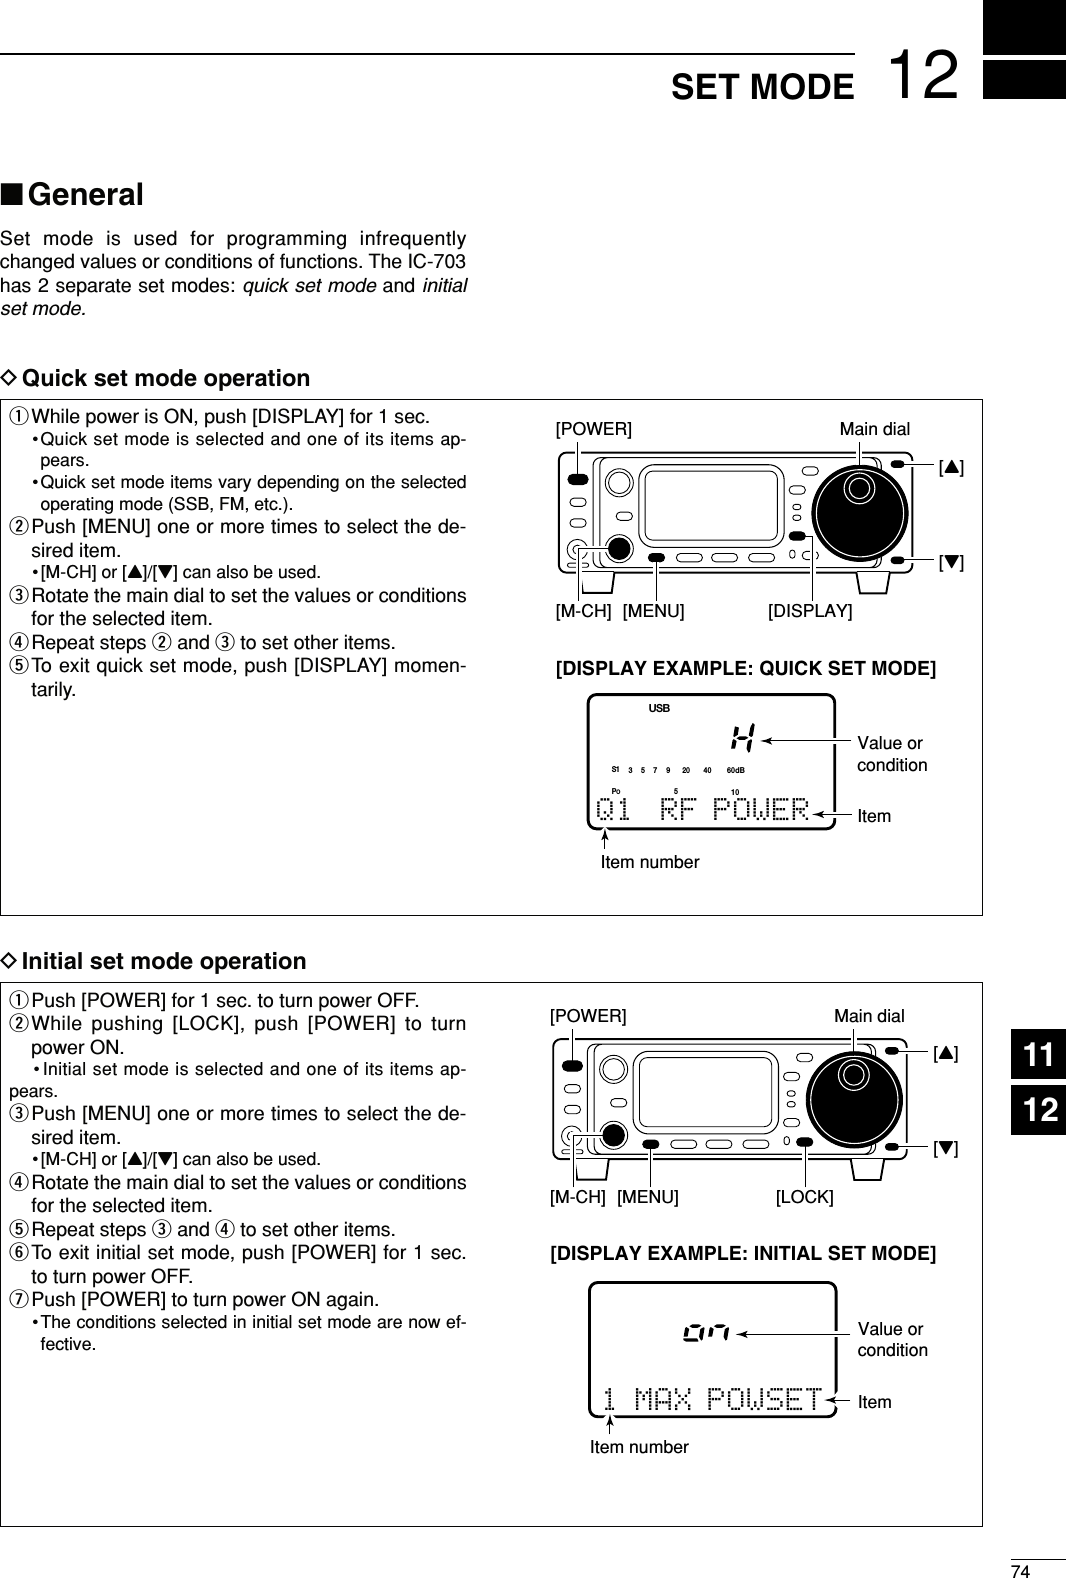 1274SET MODE■GeneralSet mode is used for programming infrequentlychanged values or conditions of functions. The IC-703has 2 separate set modes: quick set mode and initialset mode.qWhile power is ON, push [DISPLAY] for 1 sec.•Quick set mode is selected and one of its items ap-pears.•Quick set mode items vary depending on the selectedoperating mode (SSB, FM, etc.).wPush [MENU] one or more times to select the de-sired item.• [M-CH] or [Y]/[Z] can also be used.eRotate the main dial to set the values or conditionsfor the selected item.rRepeat steps wand eto set other items.tTo exit quick set mode, push [DISPLAY] momen-tarily.[MENU] [DISPLAY][M-CH][POWER] Main dial[Y][Z]Q1 RF POWERUSBItem numberItemValue or condition[DISPLAY EXAMPLE: QUICK SET MODE]POS15537920401060dBDQuick set mode operationqPush [POWER] for 1 sec. to turn power OFF.wWhile pushing [LOCK], push [POWER] to turnpower ON.• Initial set mode is selected and one of its items ap-pears.ePush [MENU] one or more times to select the de-sired item.• [M-CH] or [Y]/[Z] can also be used.rRotate the main dial to set the values or conditionsfor the selected item.tRepeat steps eand rto set other items.yTo exit initial set mode, push [POWER] for 1 sec.to turn power OFF.uPush [POWER] to turn power ON again.•The conditions selected in initial set mode are now ef-fective.[MENU] [LOCK][M-CH][POWER] Main dial[Y][Z]Item numberItemValue or condition 1 MAX POWSET[DISPLAY EXAMPLE: INITIAL SET MODE]DInitial set mode operation1112